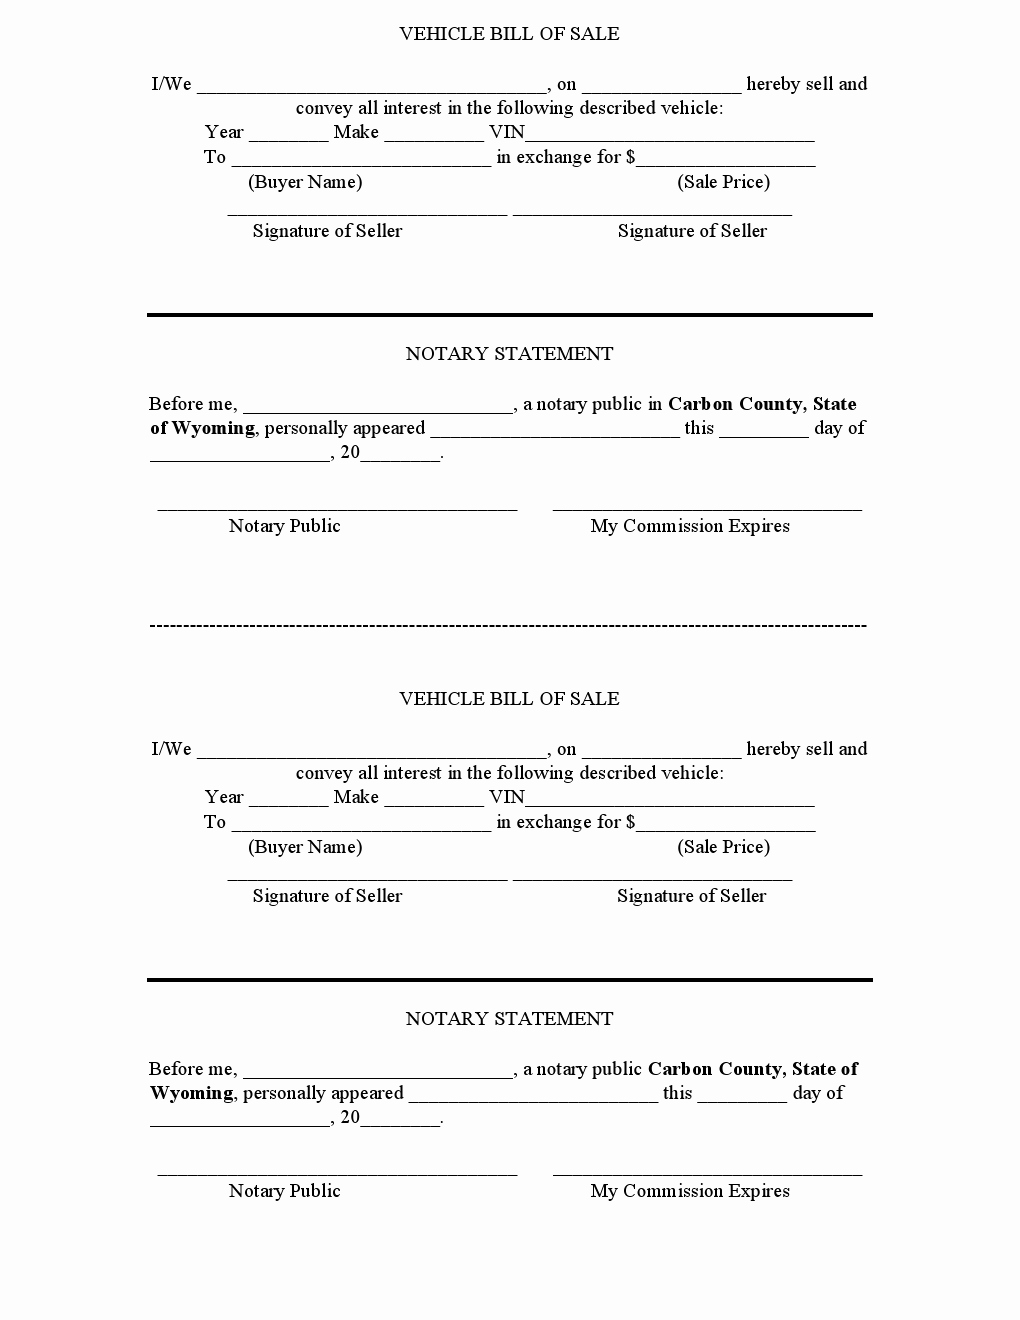 Ga Car Bill Of Sale Elegant Free Carbon Country Vehicle Bill Of Sale form Download